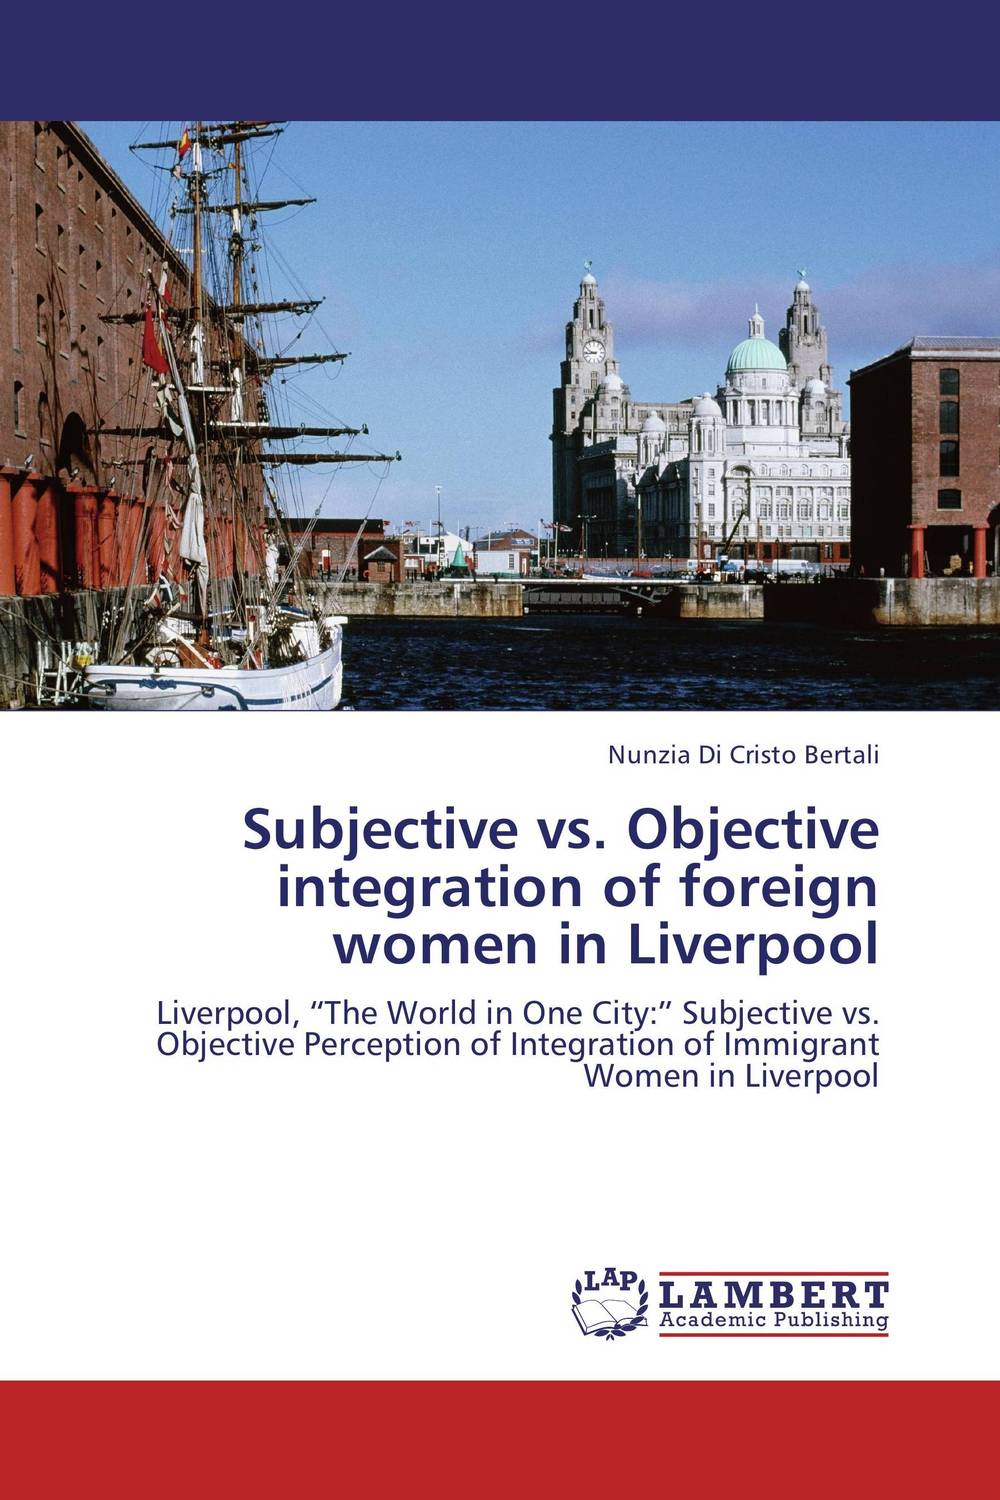 Subjective vs. Objective integration of foreign women in Liverpool